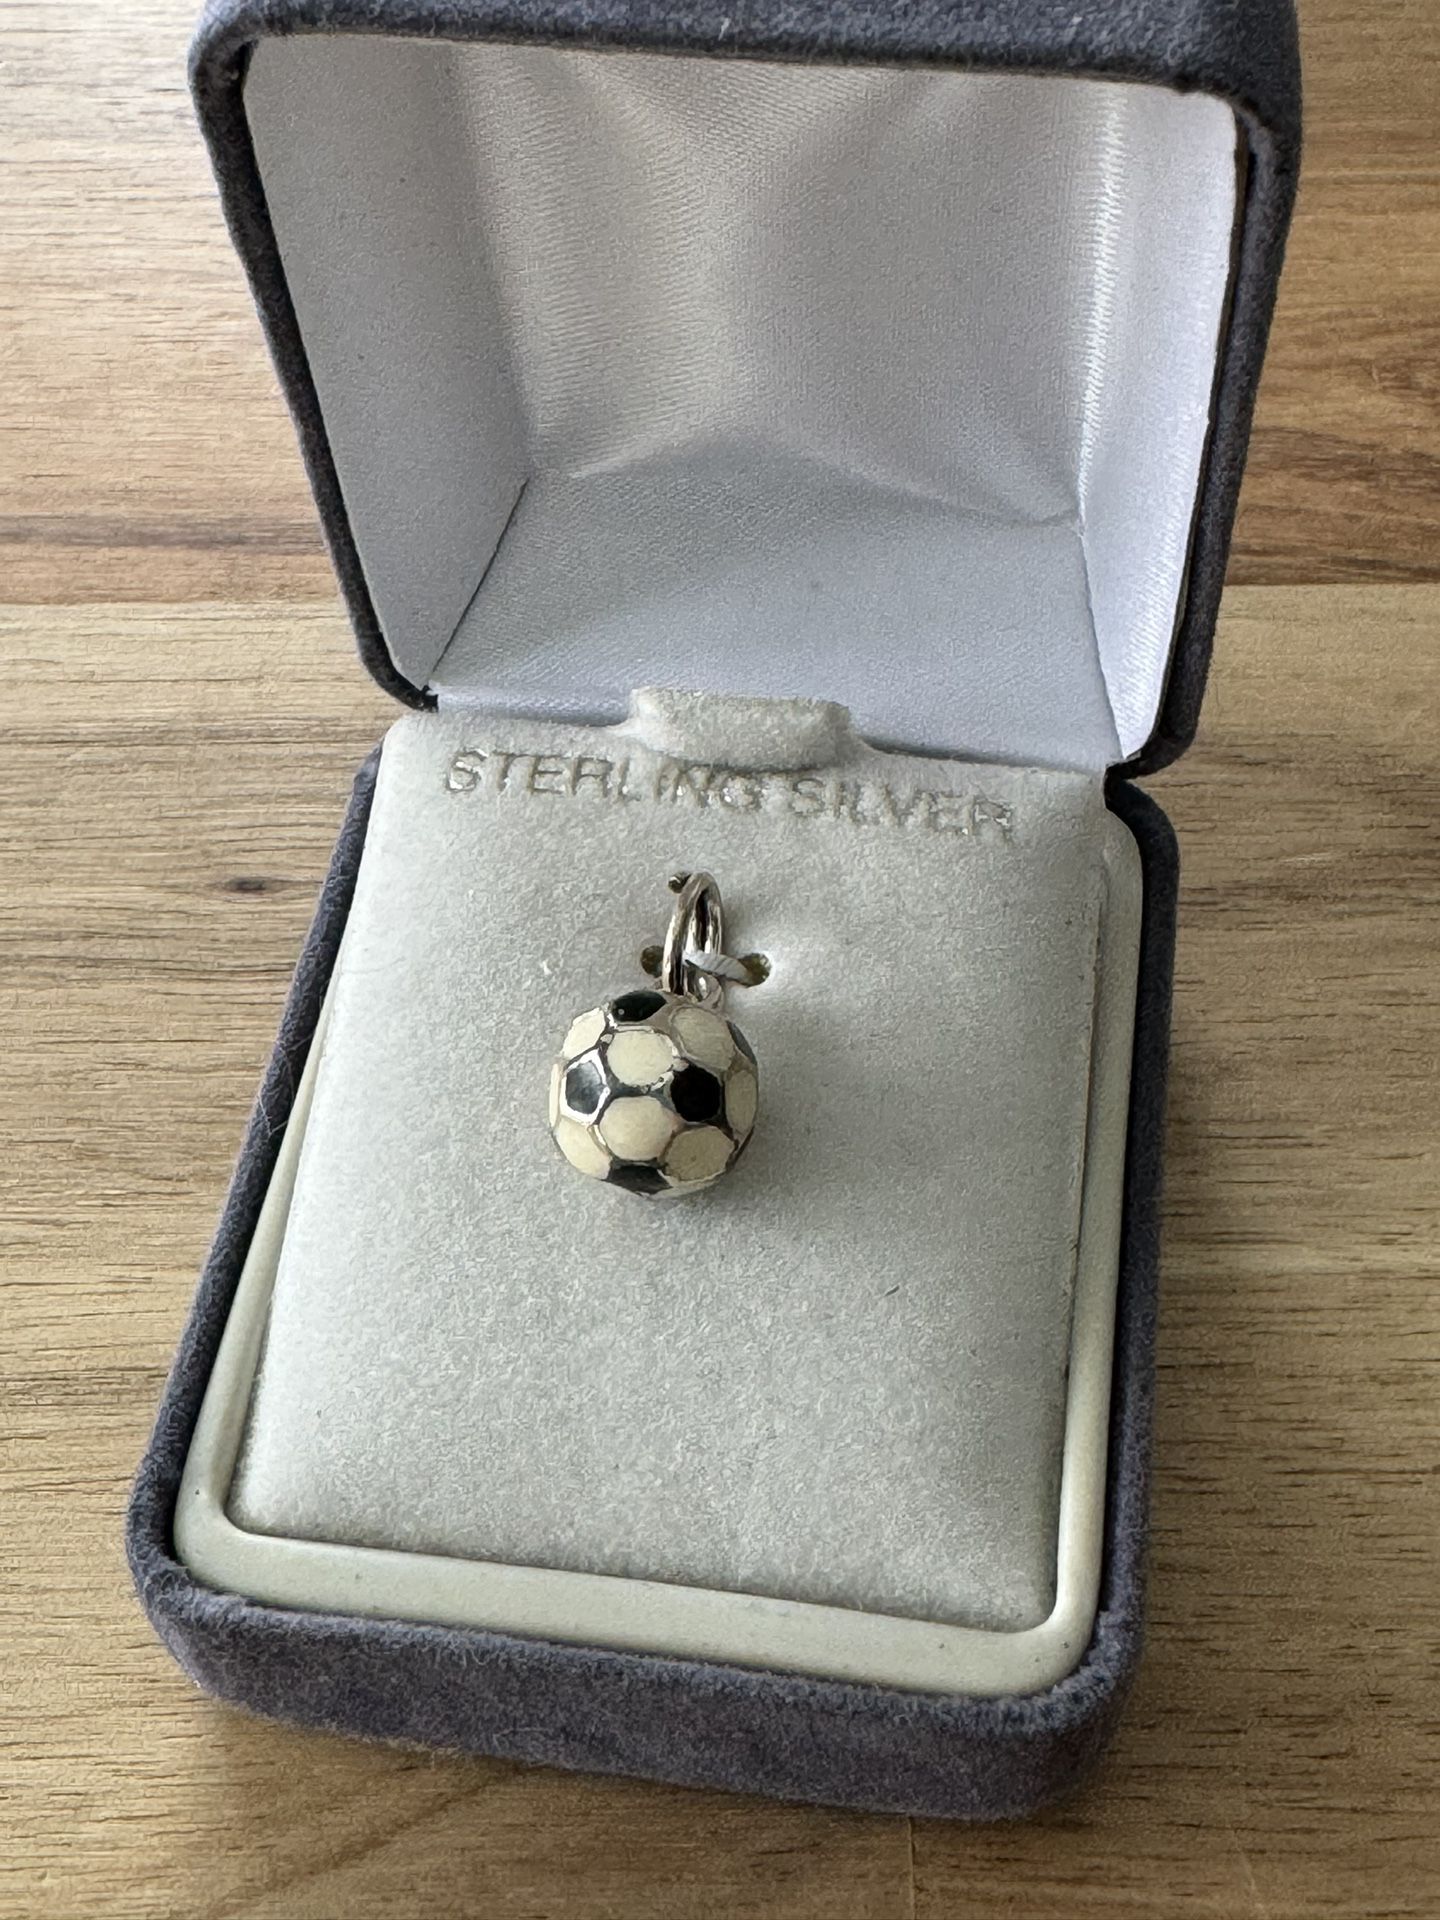 Sterling Silver, and Enameled Soccer Ball Charm